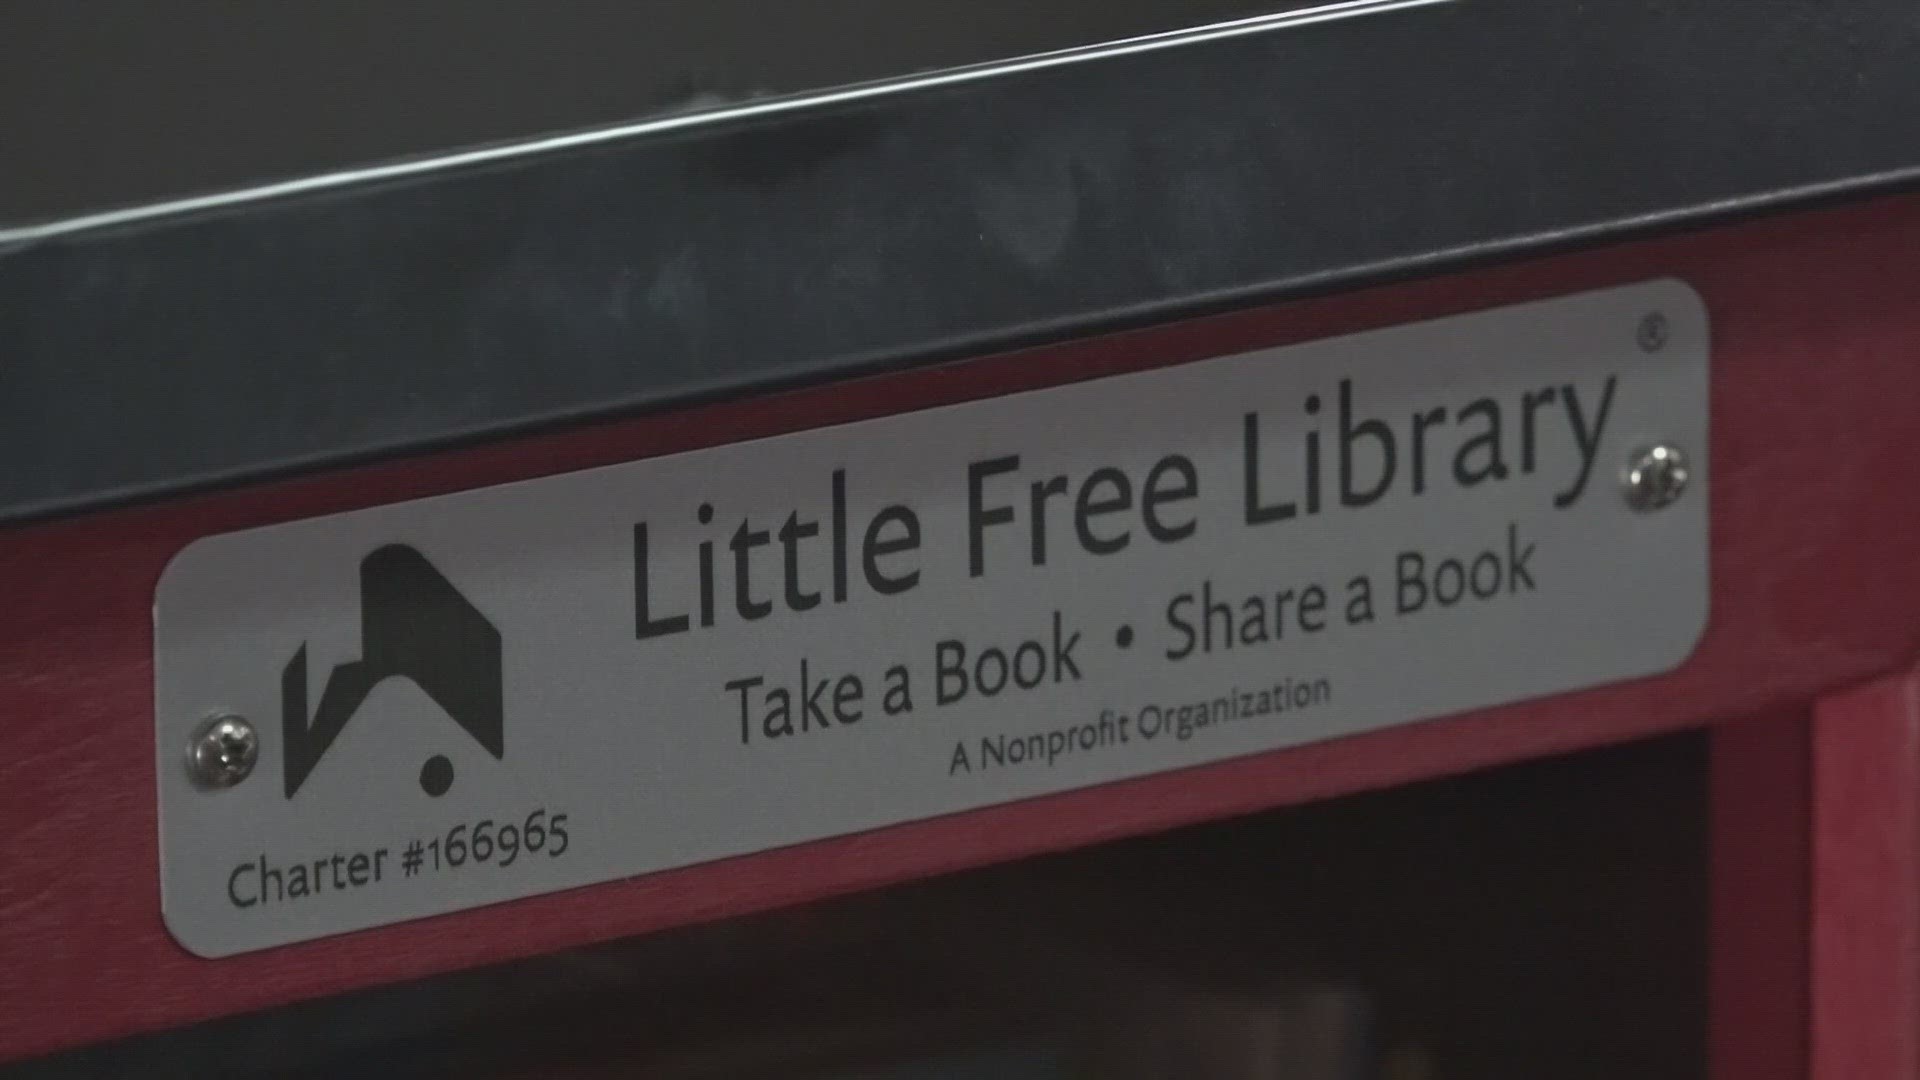 Non-profit 904WARD recently installed a Little Free Library inside Cutz-Linez & Trimz on the city's Northside.